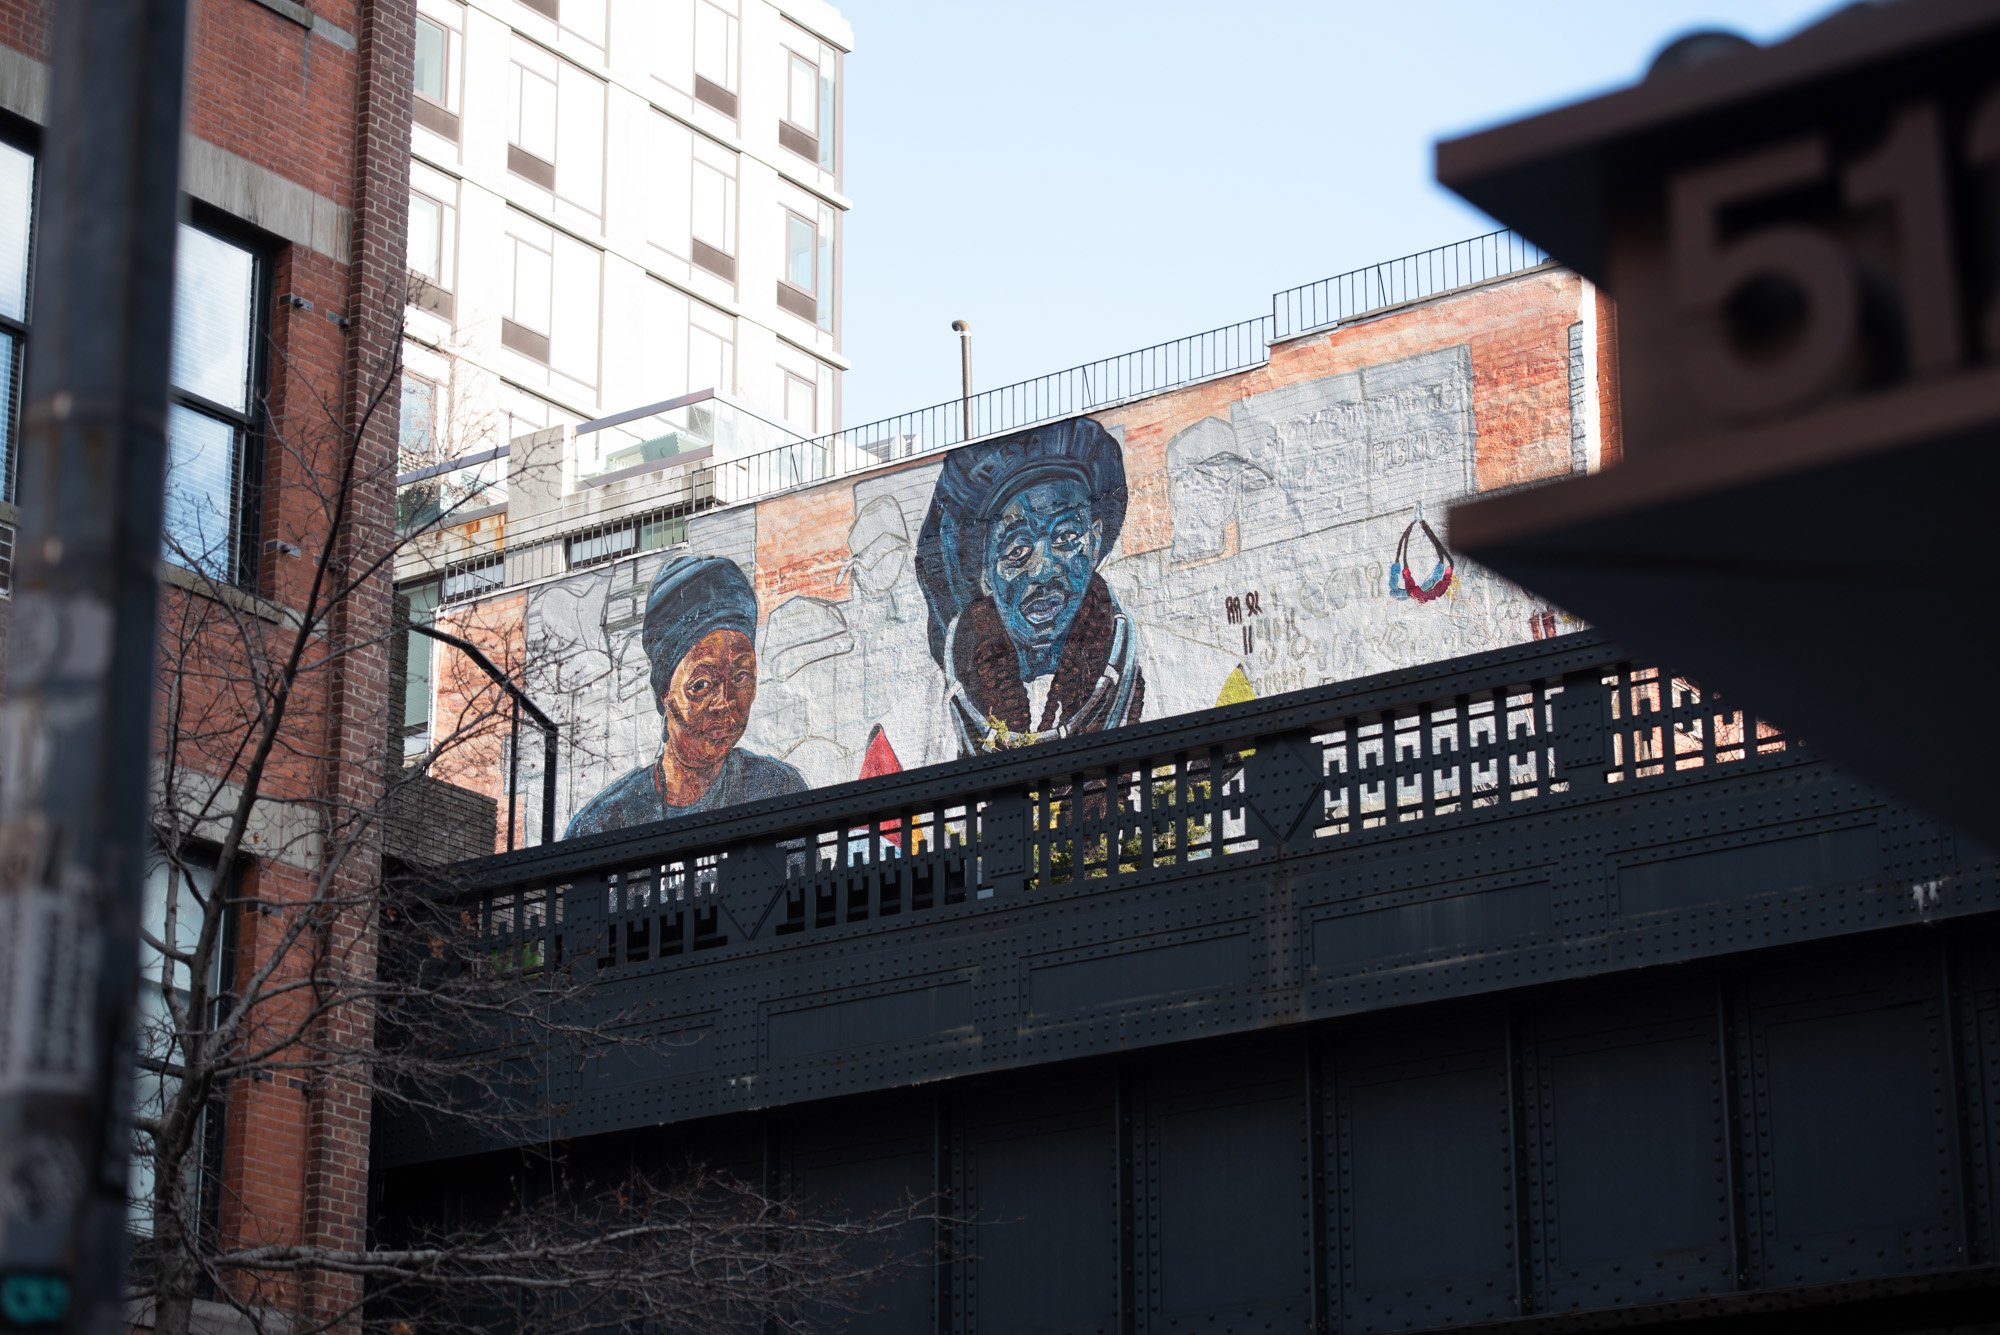  INSTALLATION VIEW, THE HIGH LINE, NEW YORK, NY, DECEMBER 2019 - FALL 2021 